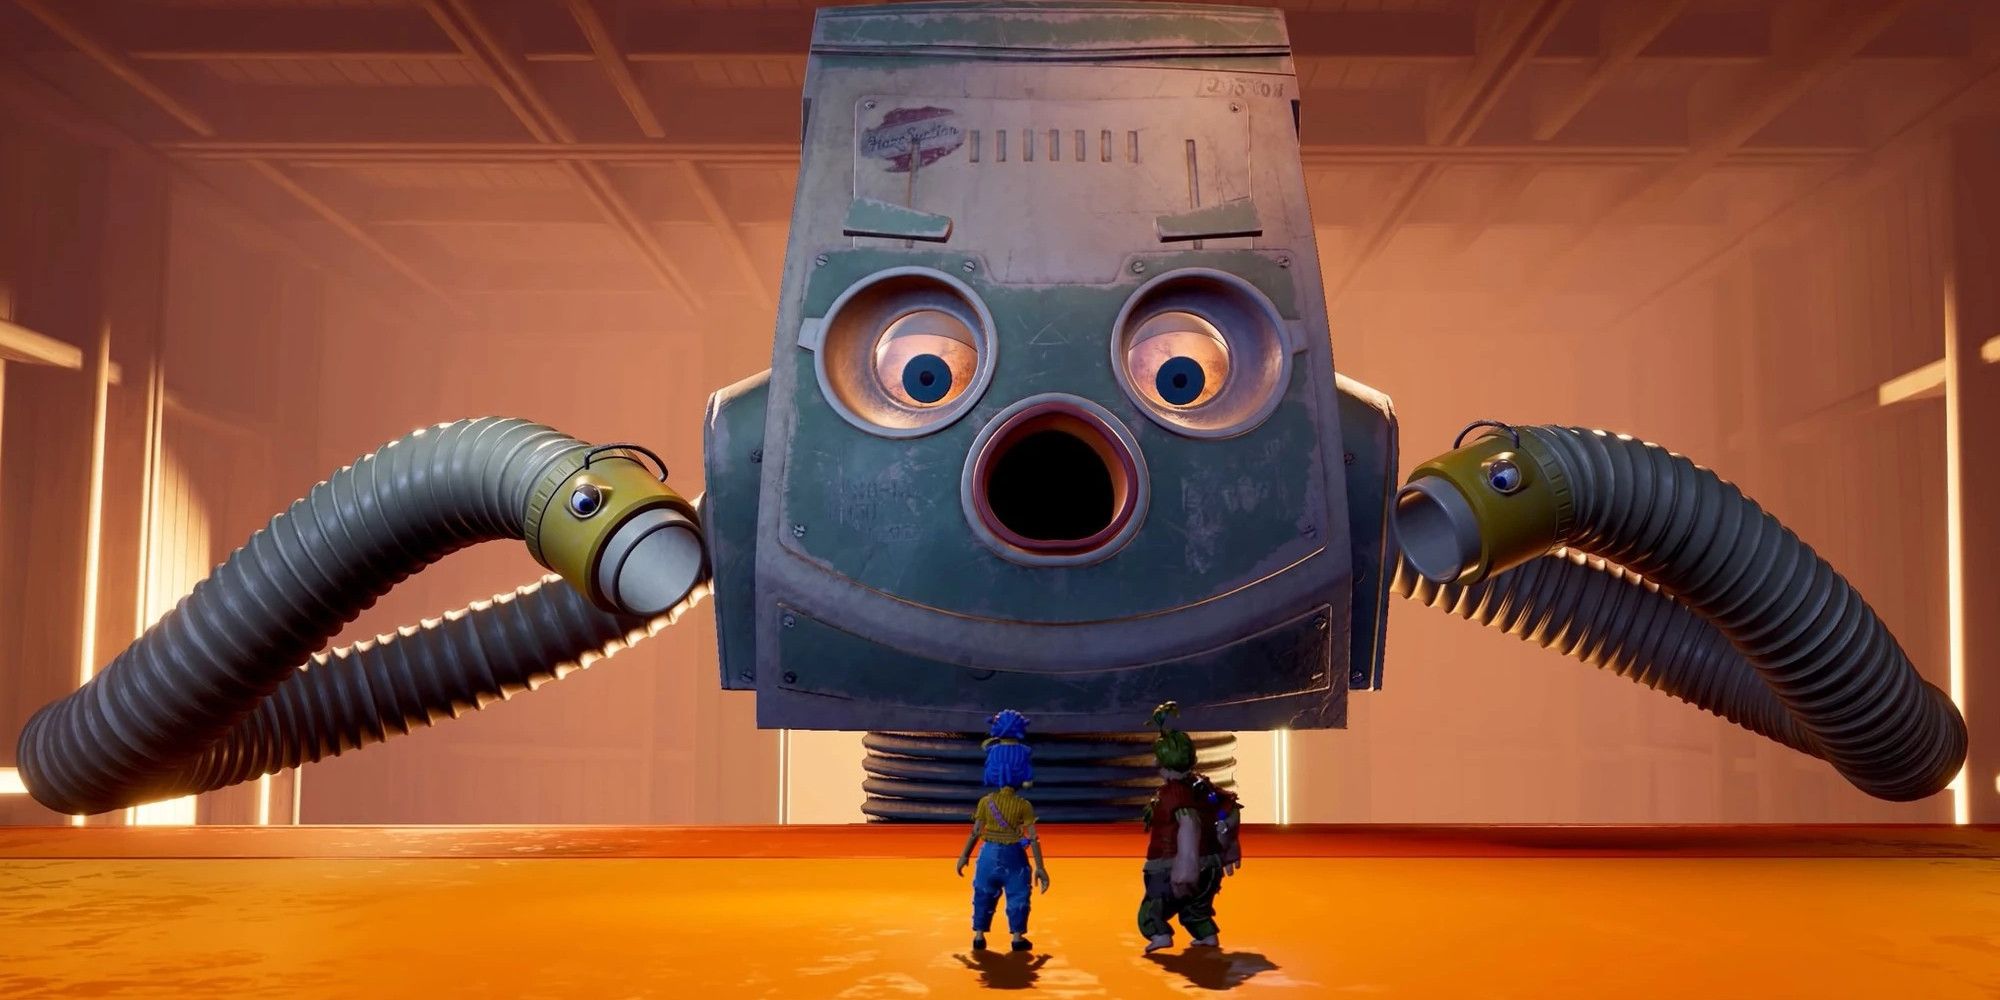 a wide shot of May and Cody facing the vacuum cleaner boss who is towering over them with its tube arms dangling above